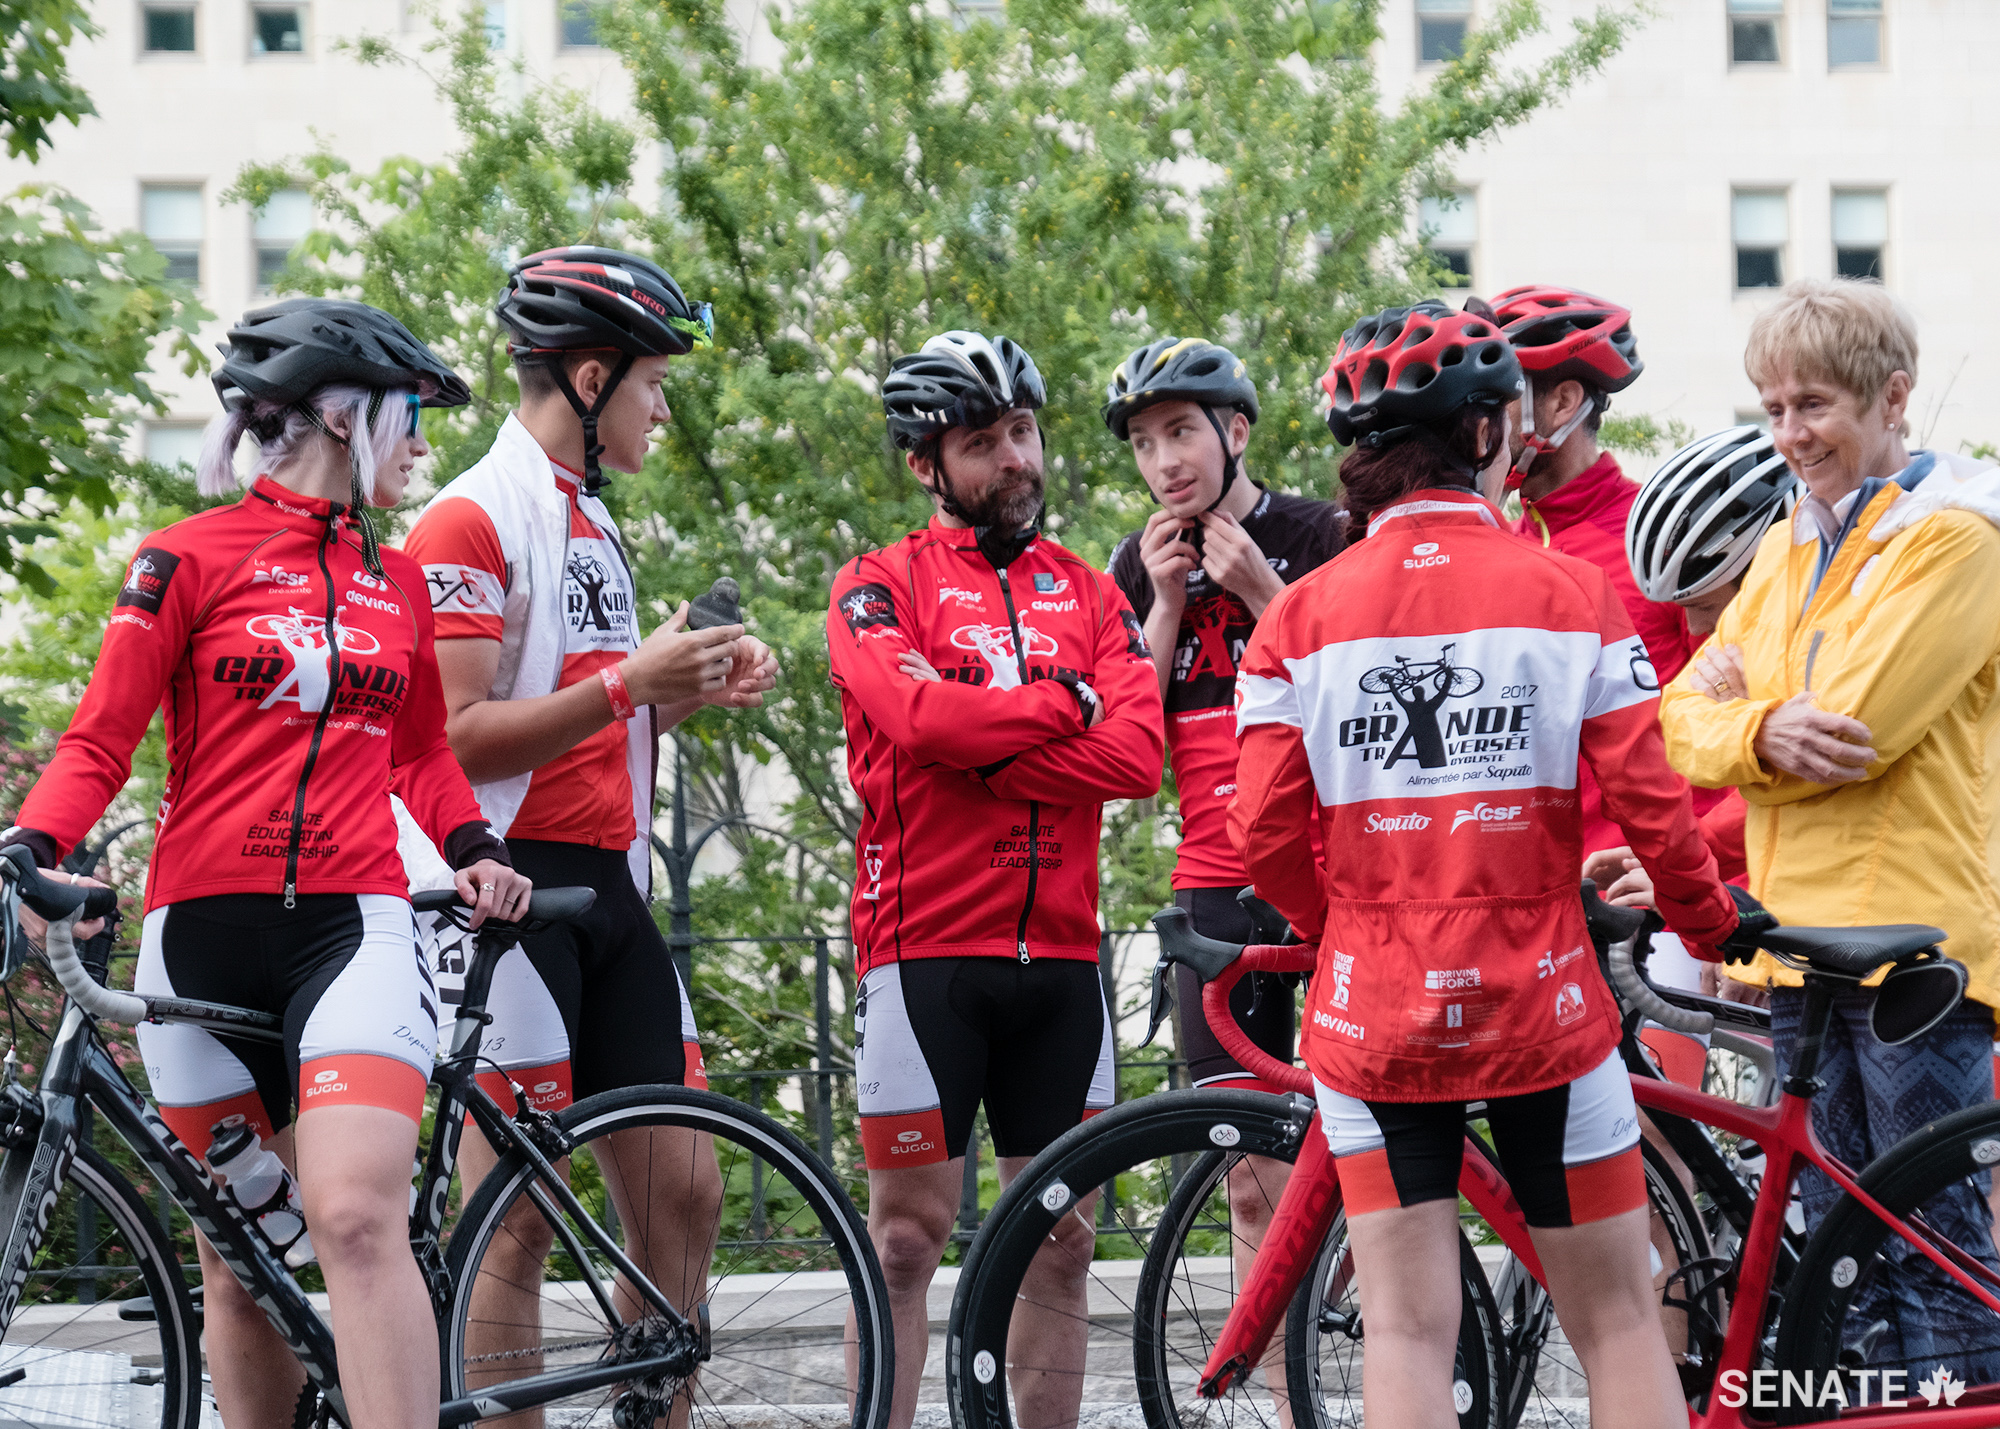 Senator Raine hangs out with La grande traversée bike crew. The crew stopped by Ottawa for Bike Day on the Hill, on their journey from Victoria, B.C. to Bathurst, N.B.